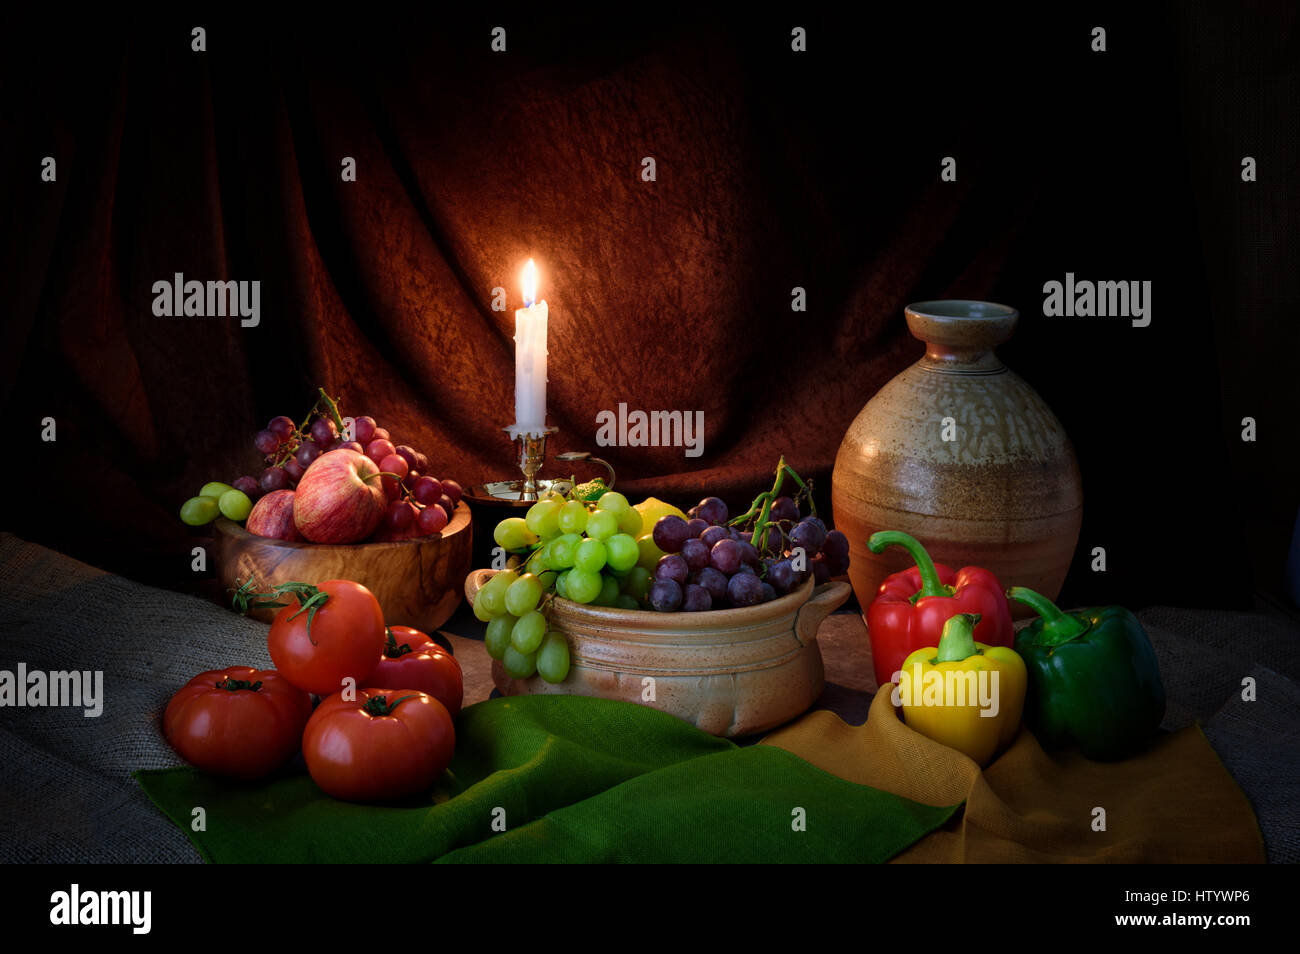 Candle lit still life photograph of fruit and vegetables in style of old master  of apples tomatoes grapes candle light and rustic pottery Stock Photo